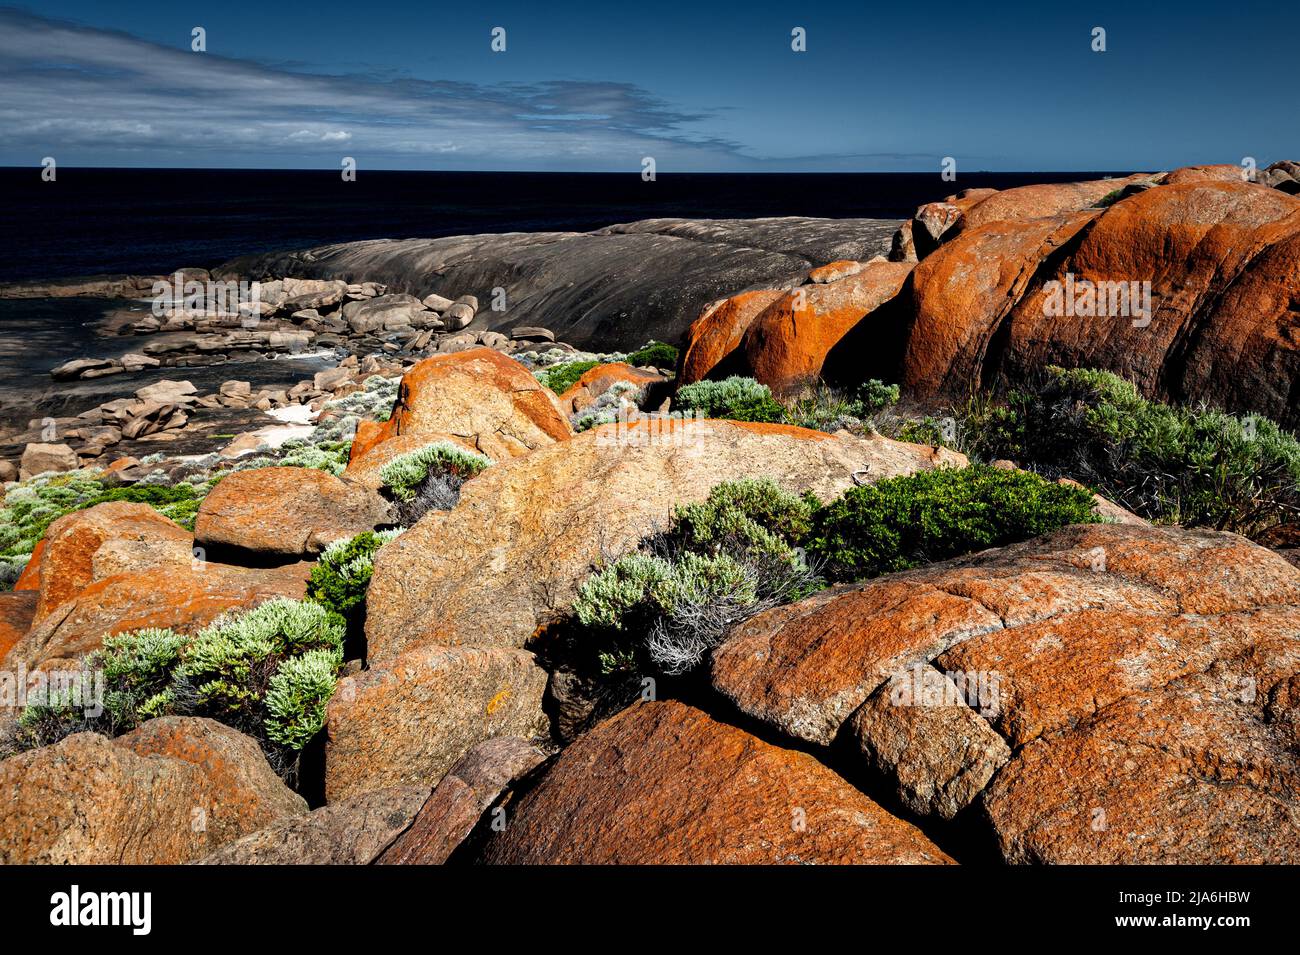 Lichen covered rocks at Quarry Bay in Leeuwin-Naturaliste National Park. Stock Photo